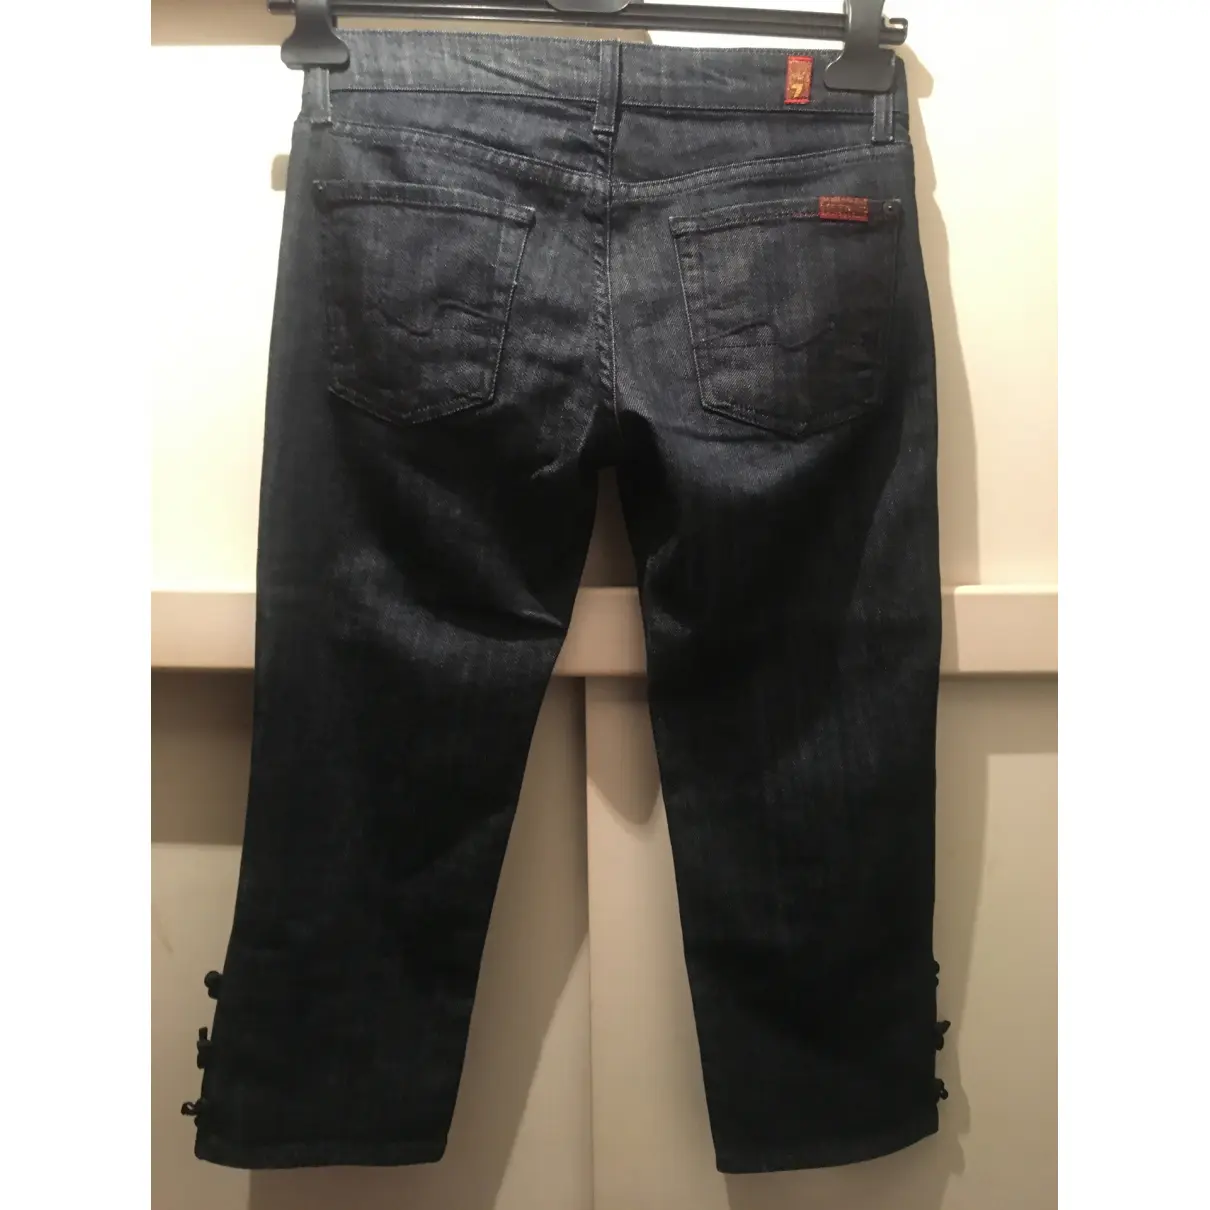 Buy 7 For All Mankind Short pants online